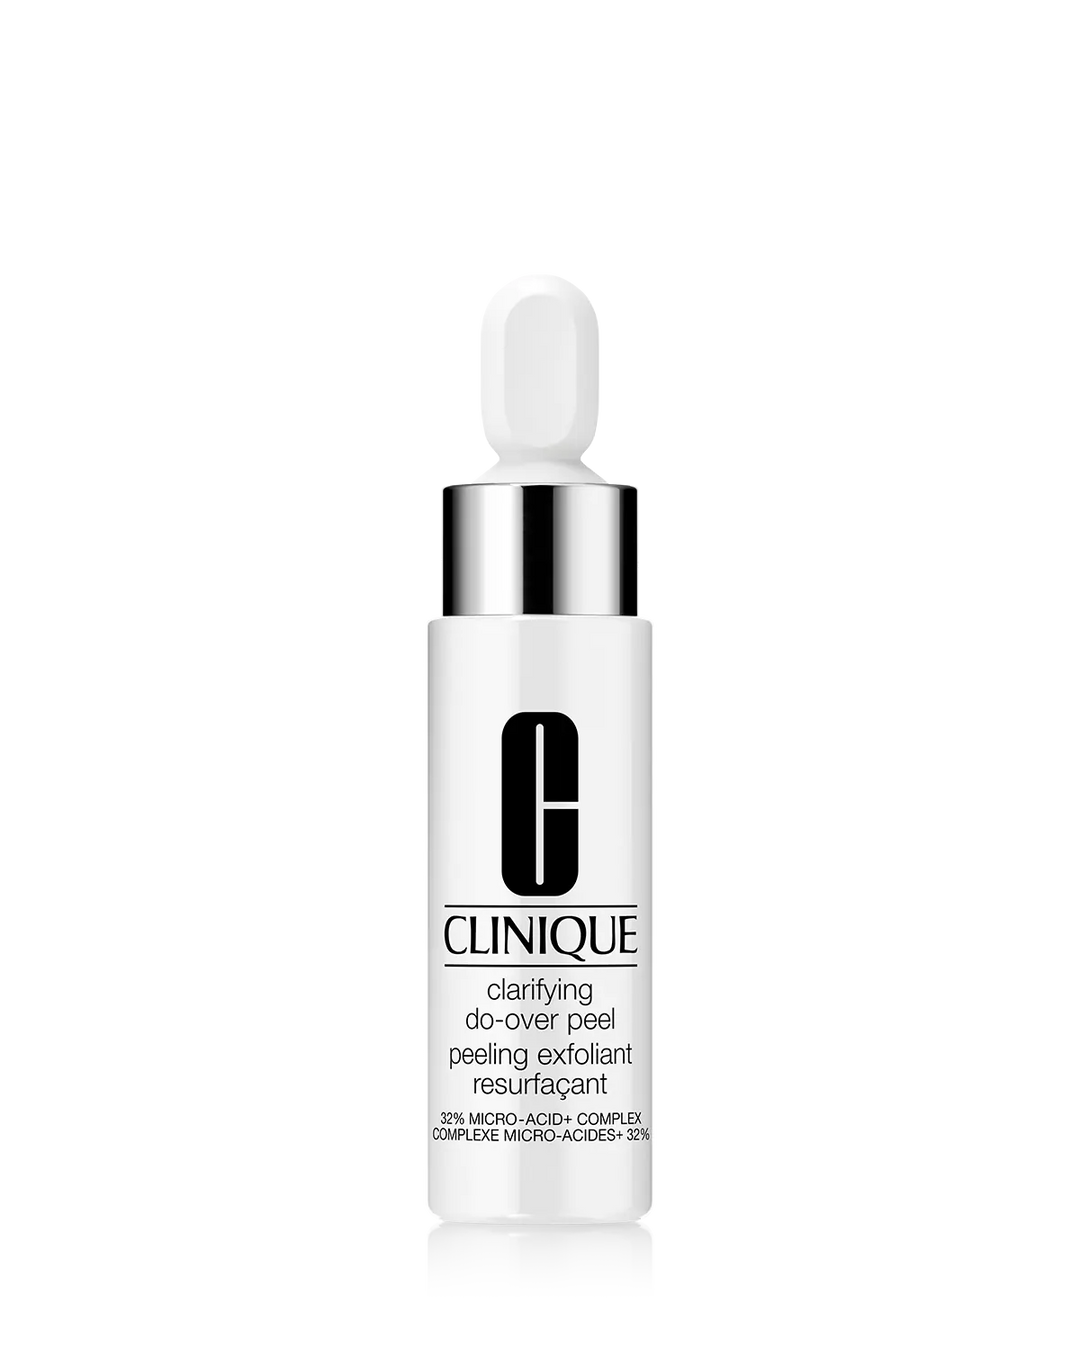 Shop The Latest Collection Of Clinique Clarifying Do-Over Peel In Lebanon